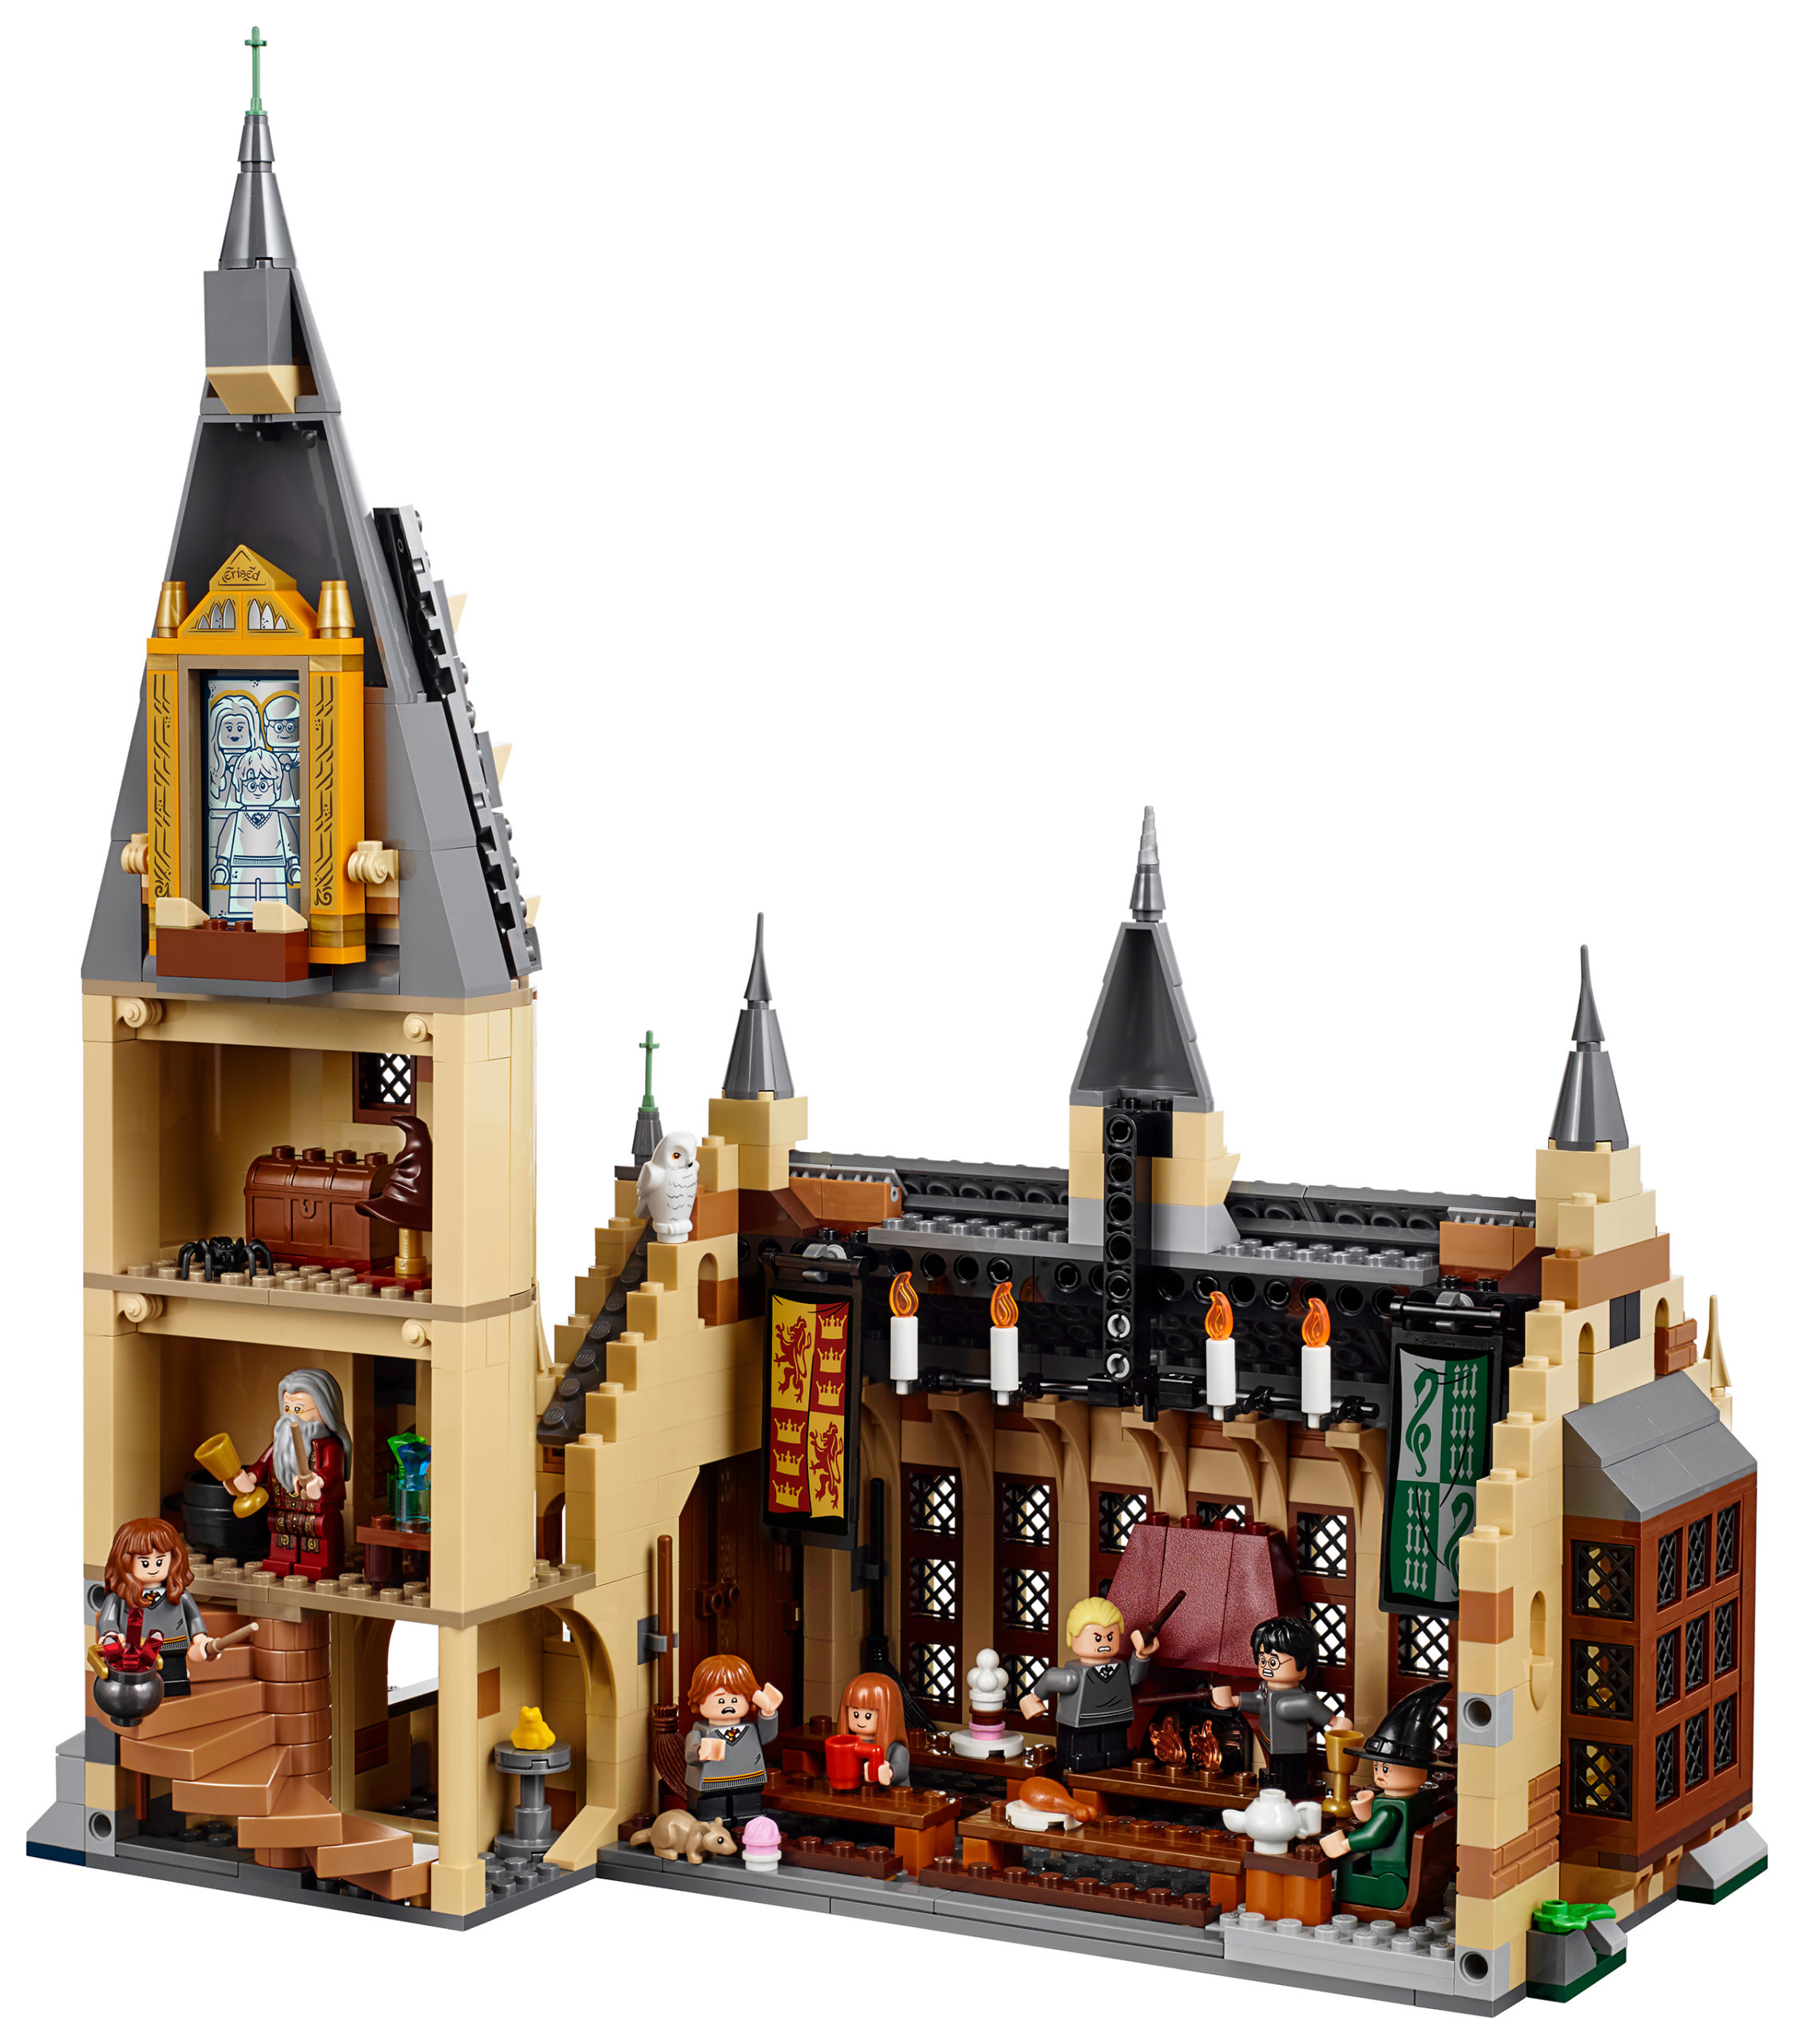 The New LEGO Harry Potter Line Starts With Hogwarts’ Great Hall